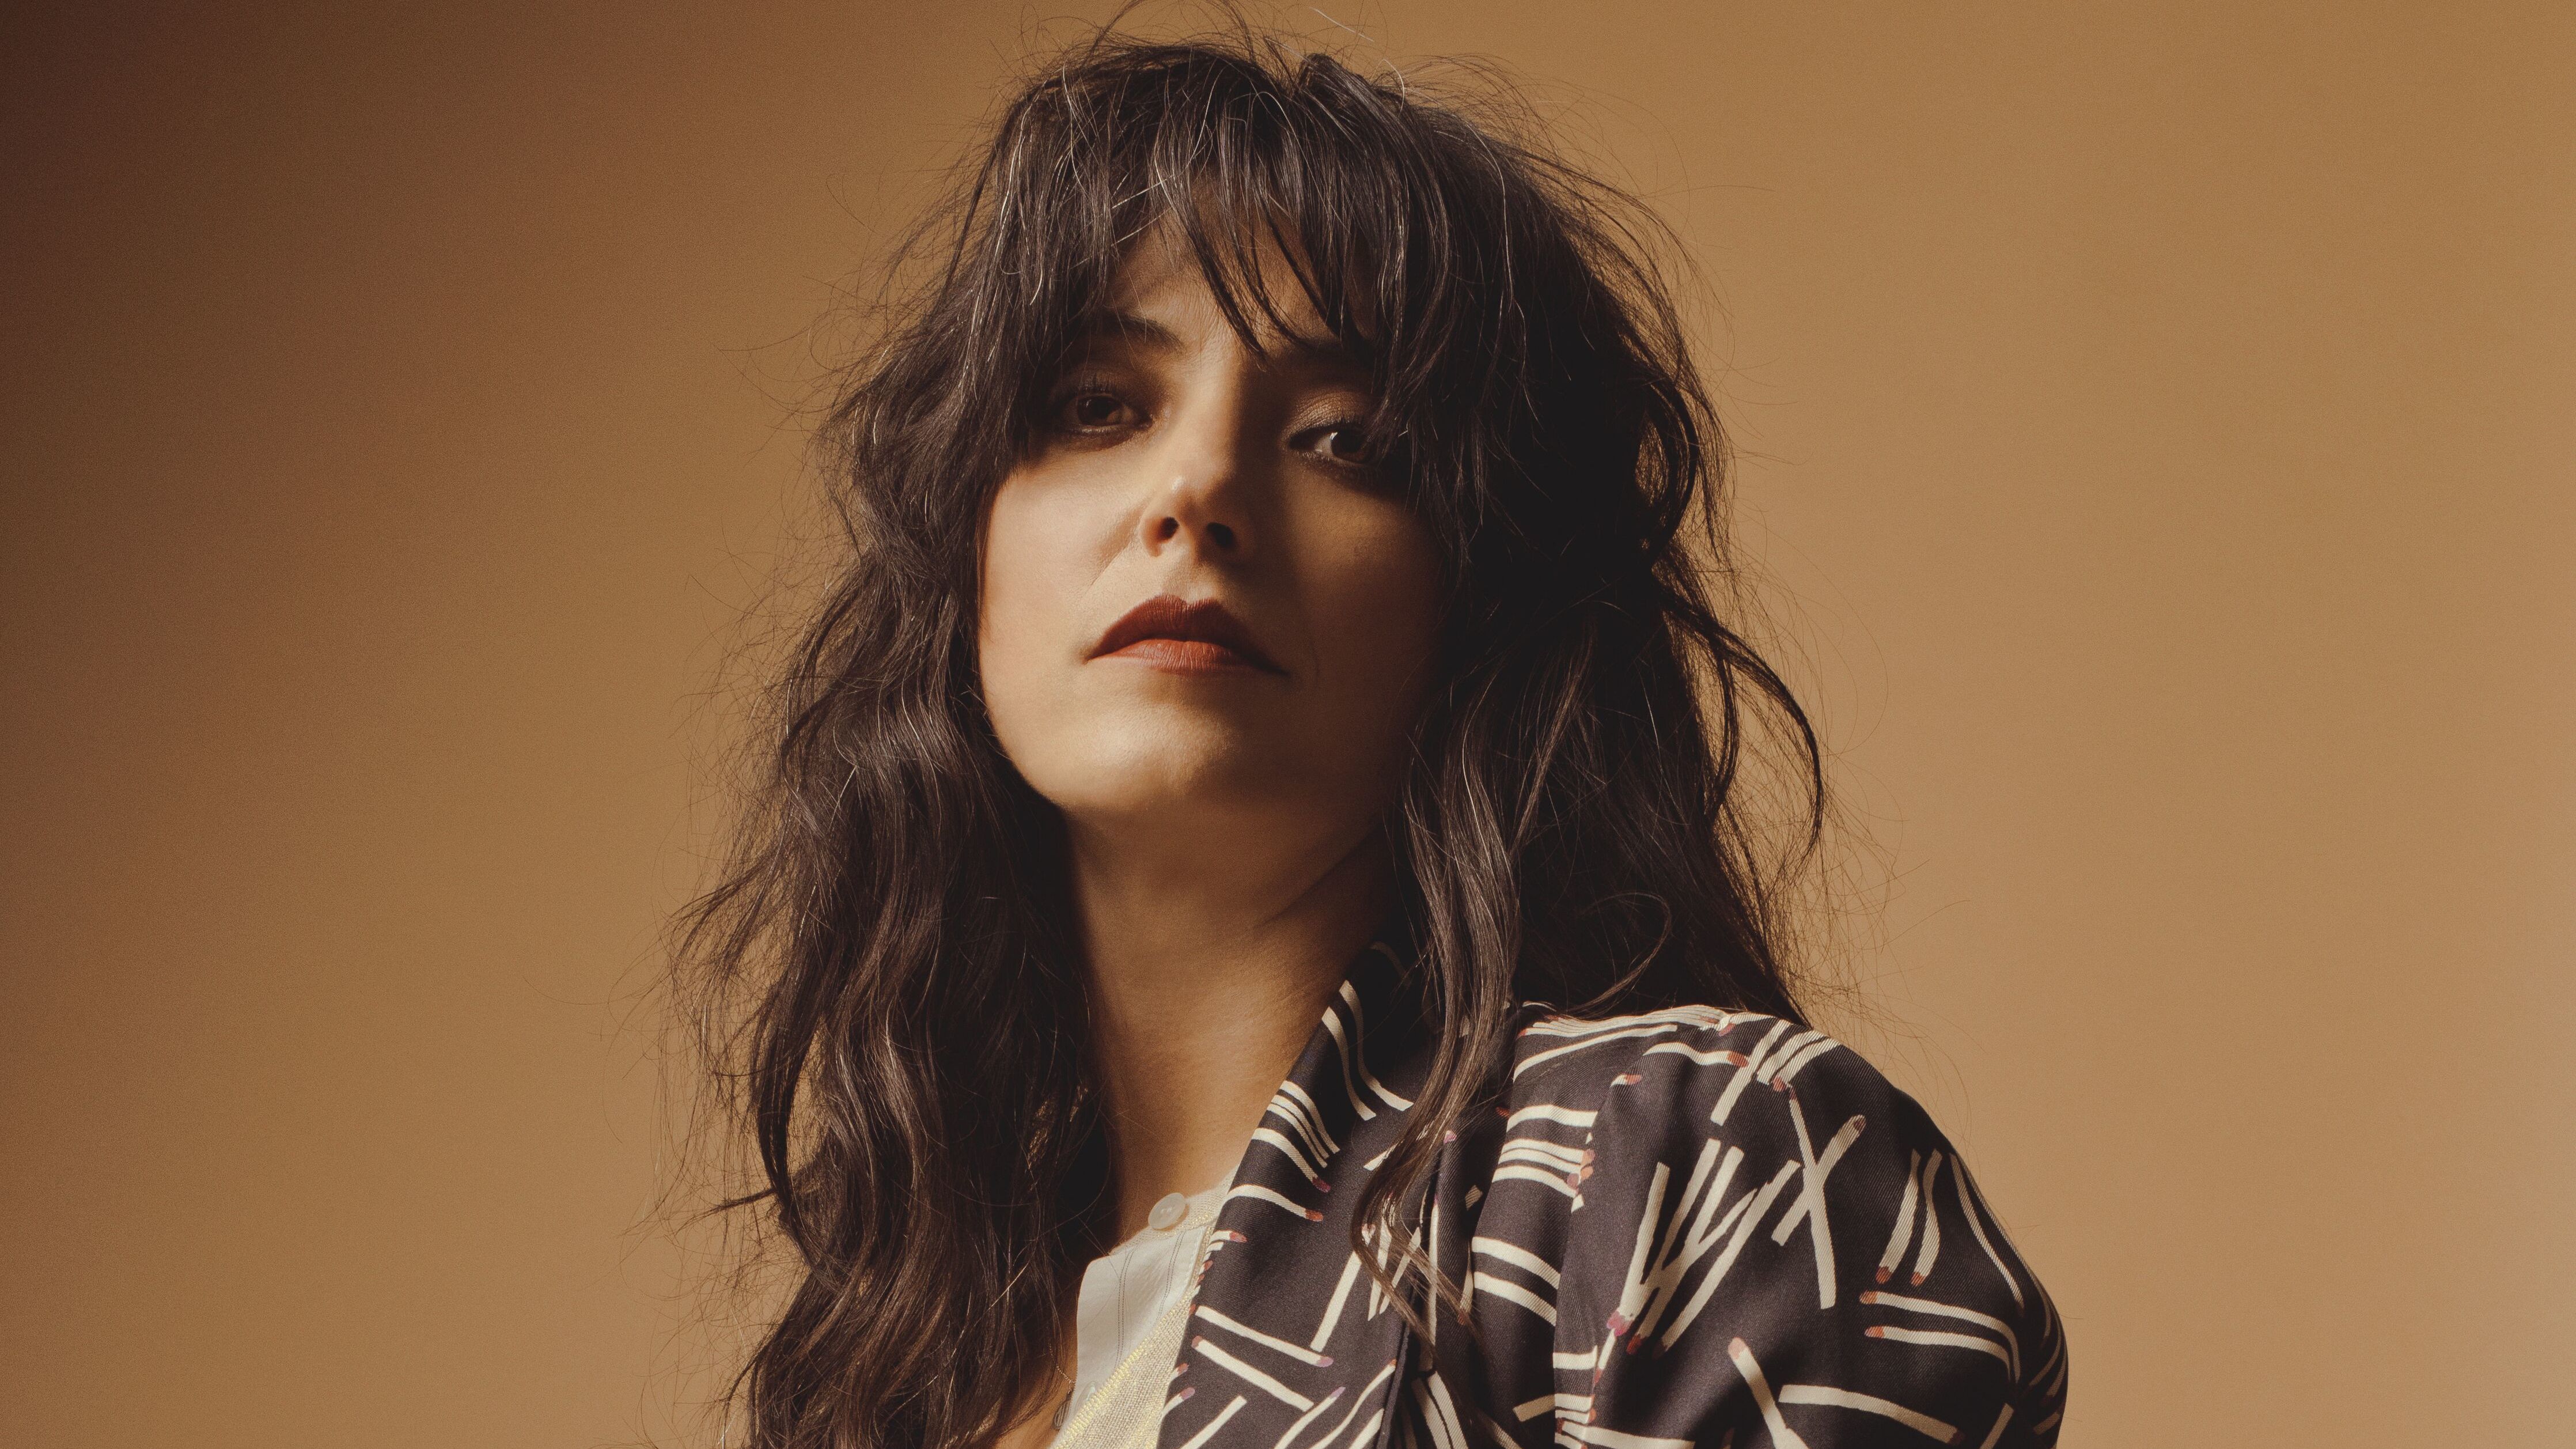 Sharon Etten Covers Johnston's "Some Things A Long Time"